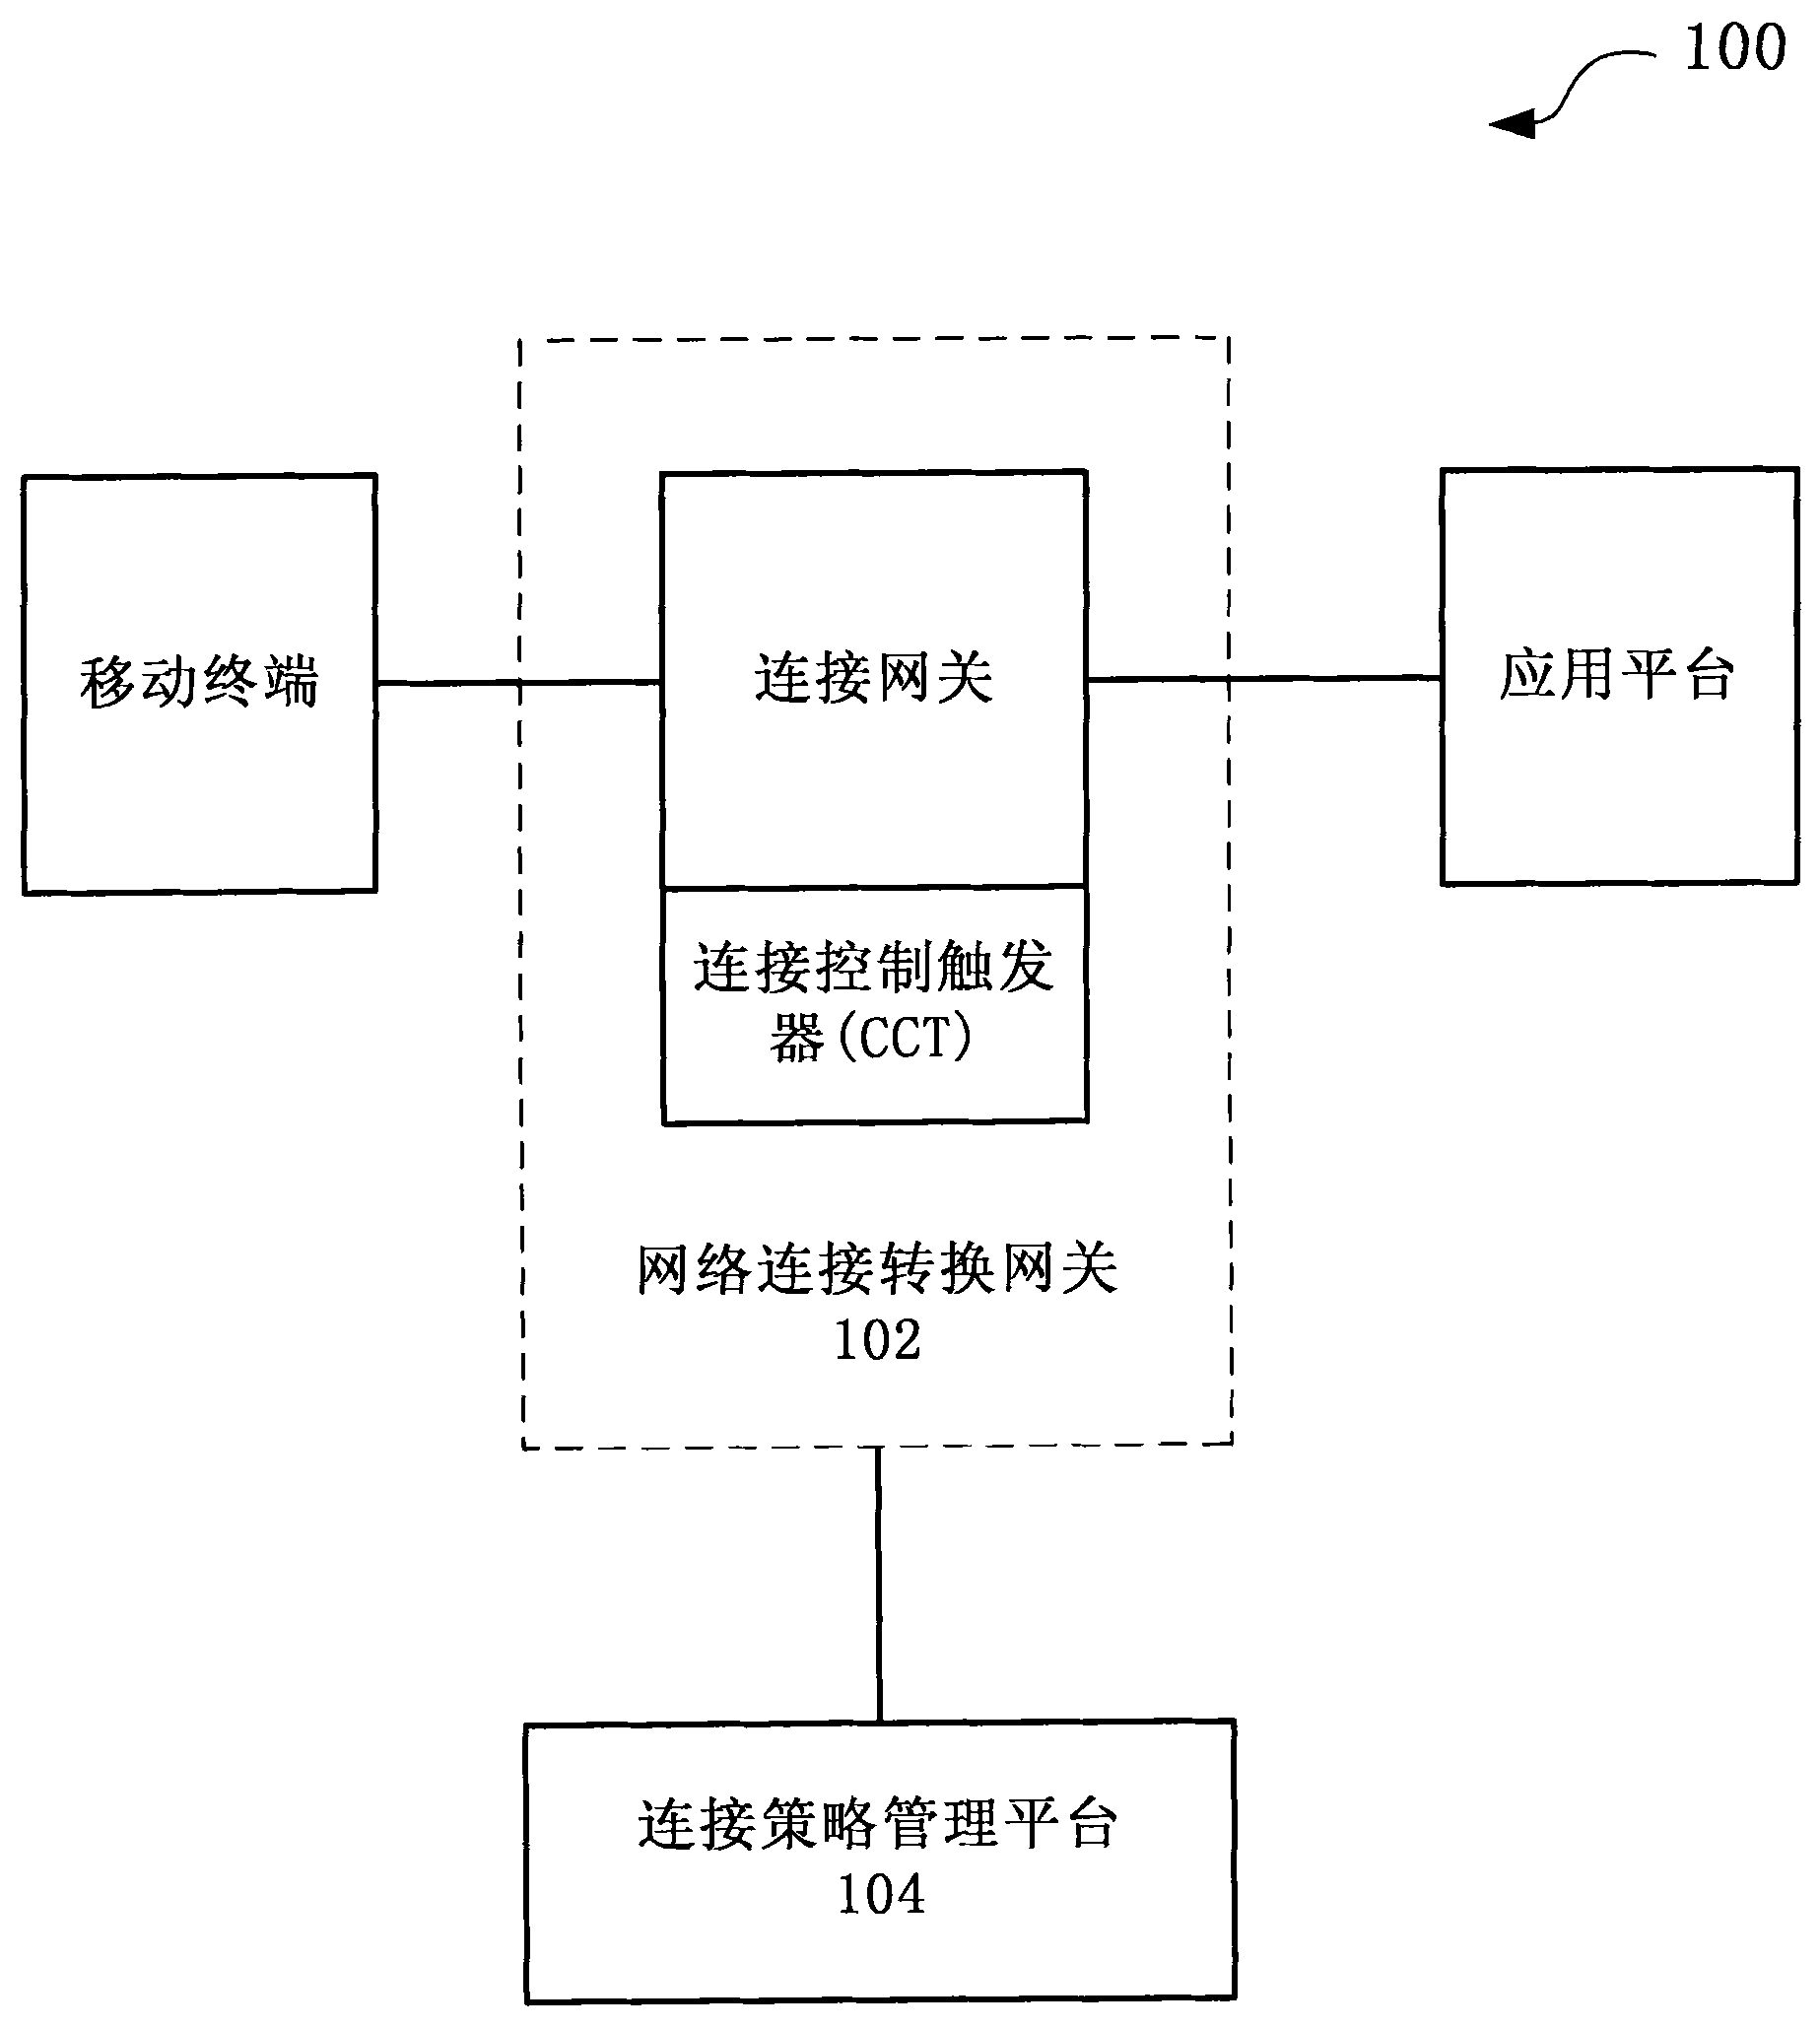 System and method for controlling networking authorization on networking application